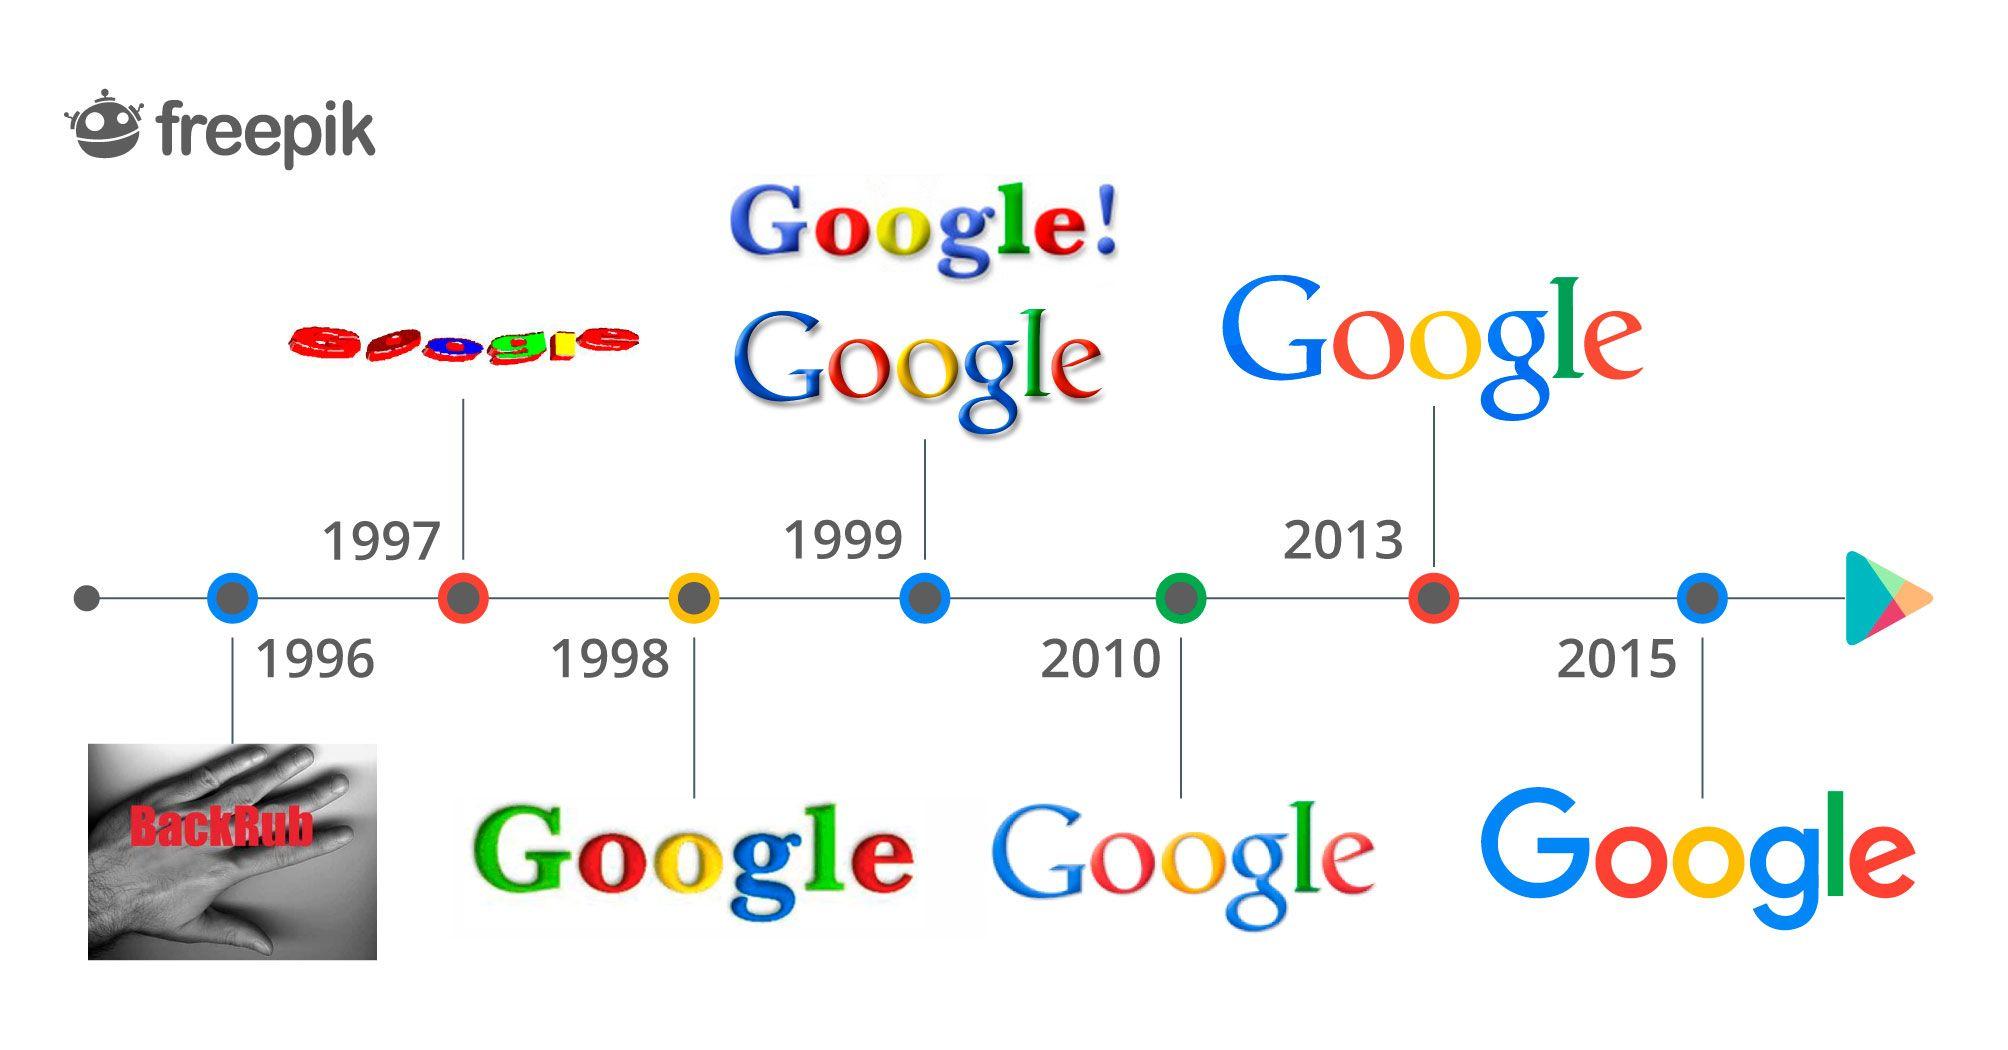 1999 Google Logo - The evolution of Google logo as well as its Play Store logo ...